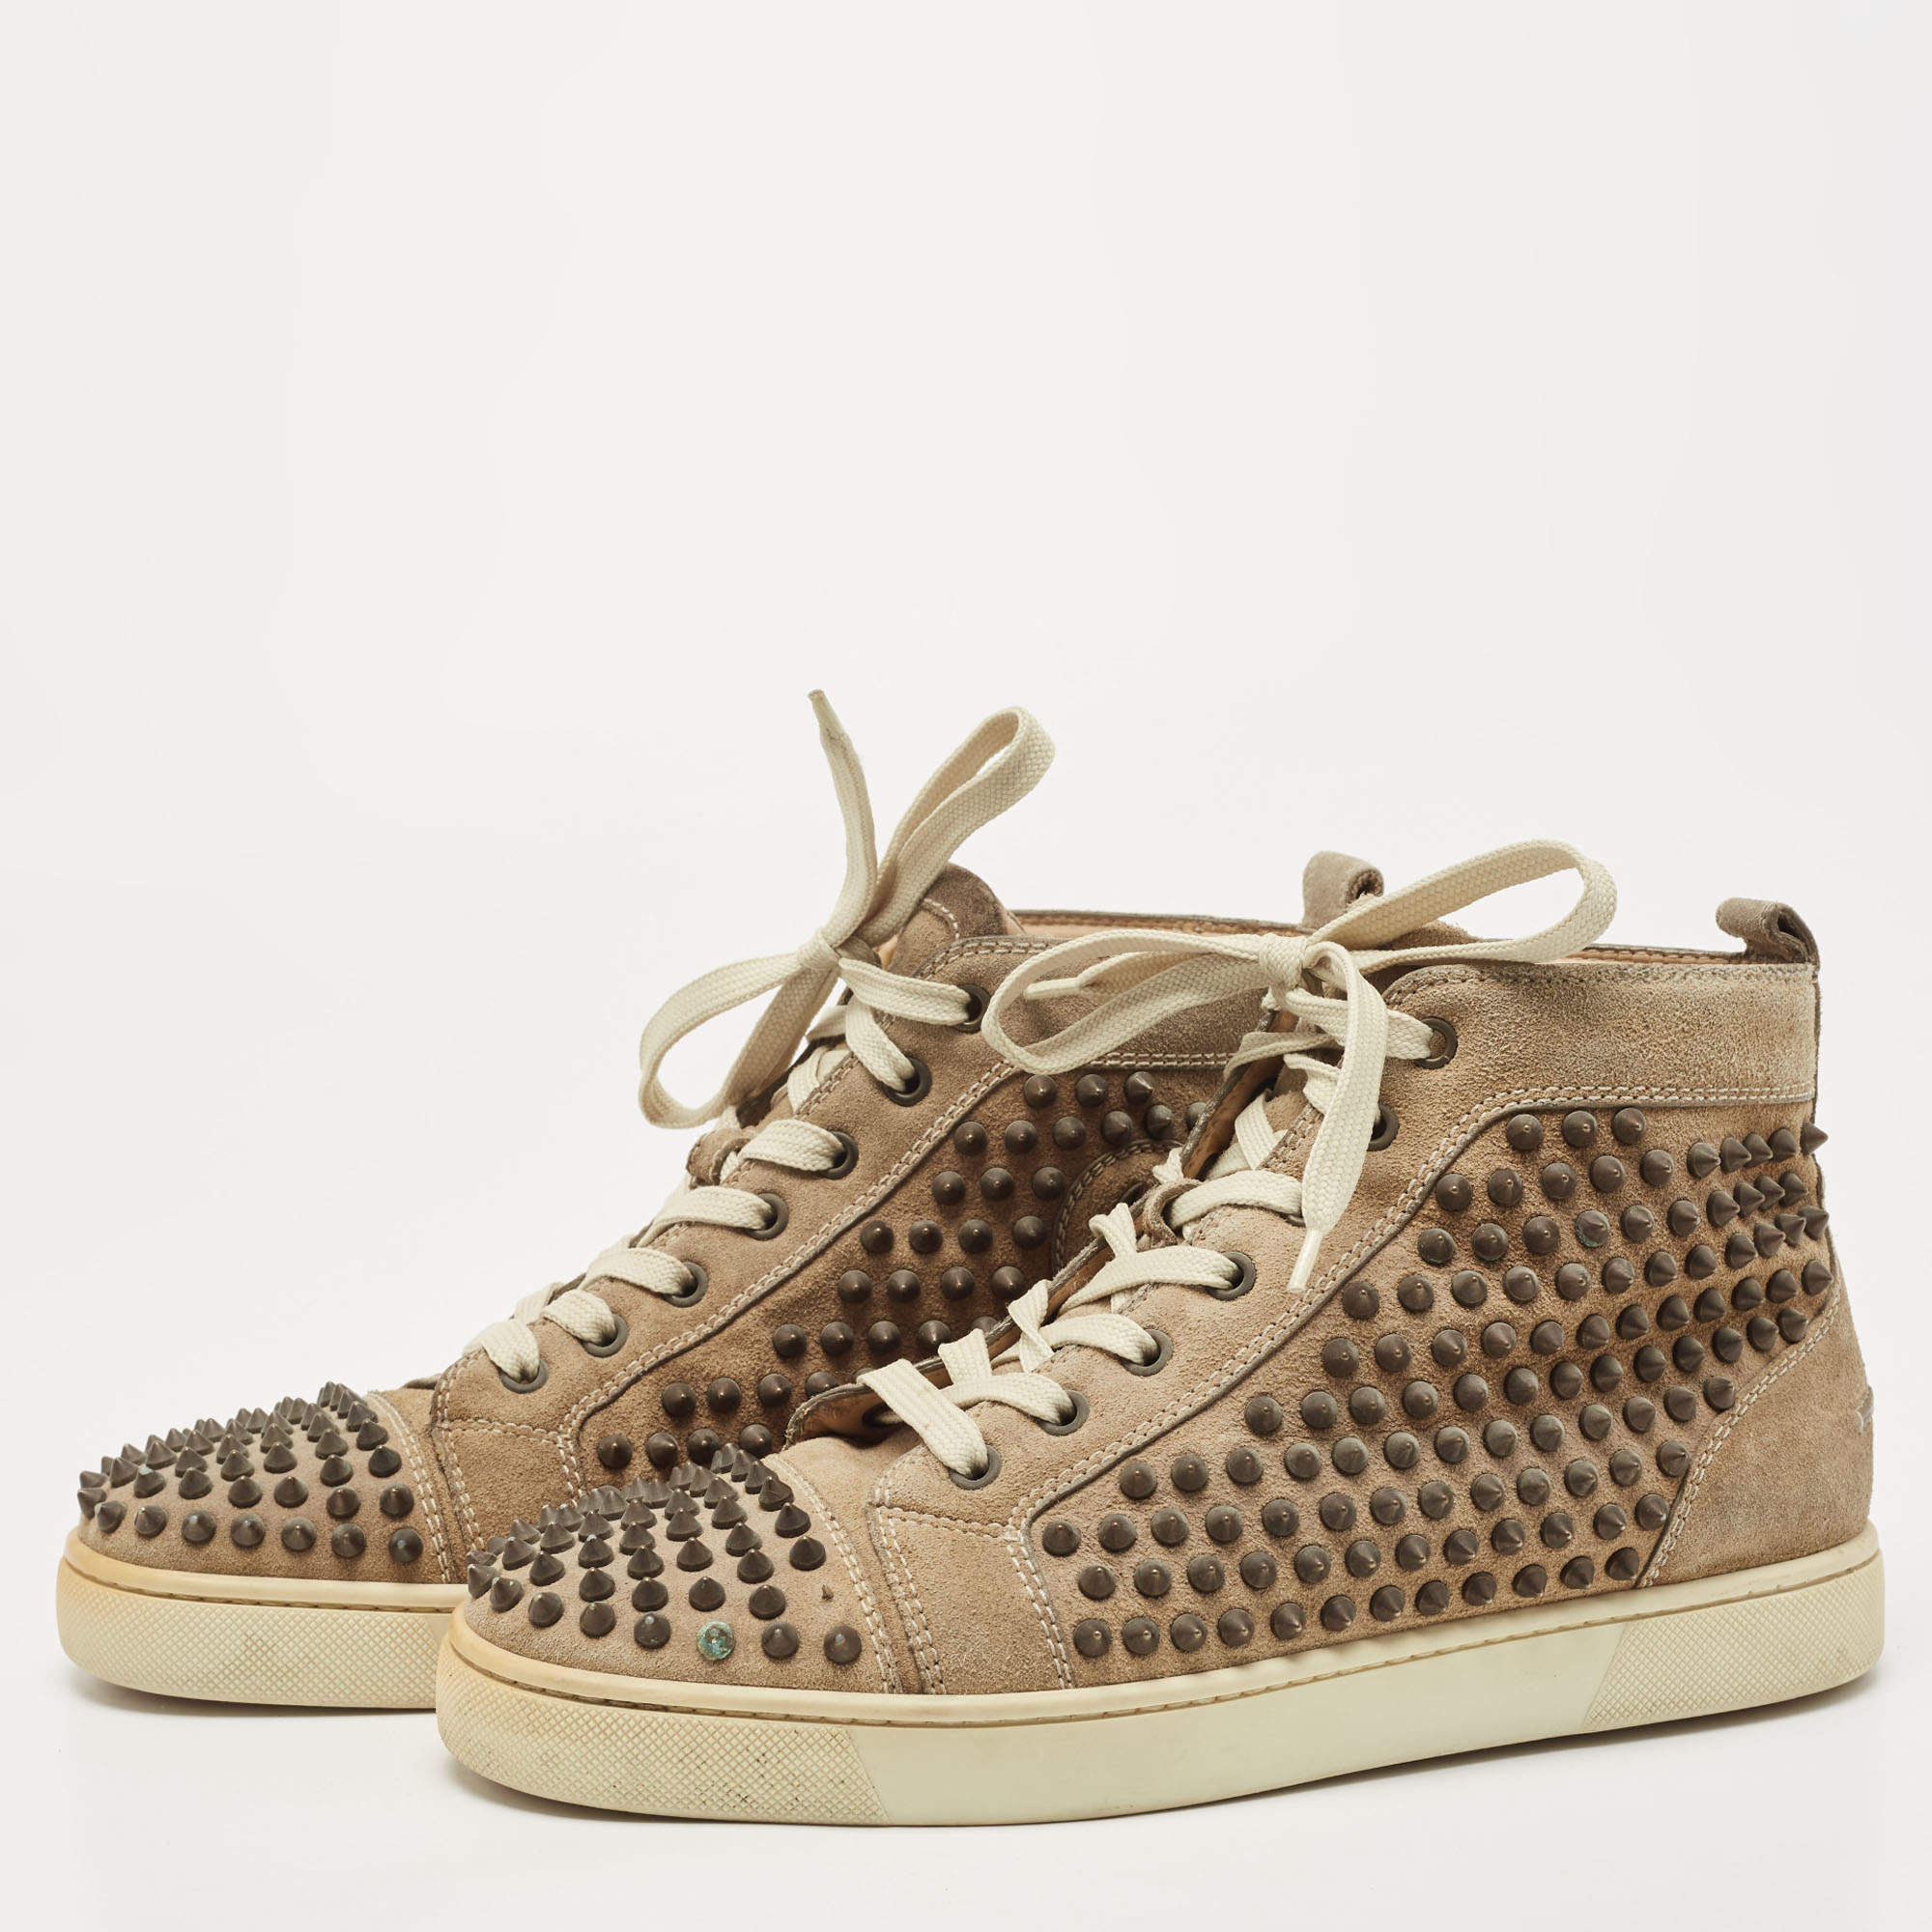 Christian Louboutin Brown Suede Spike High Top Sneakers Size 41 Christian  Louboutin